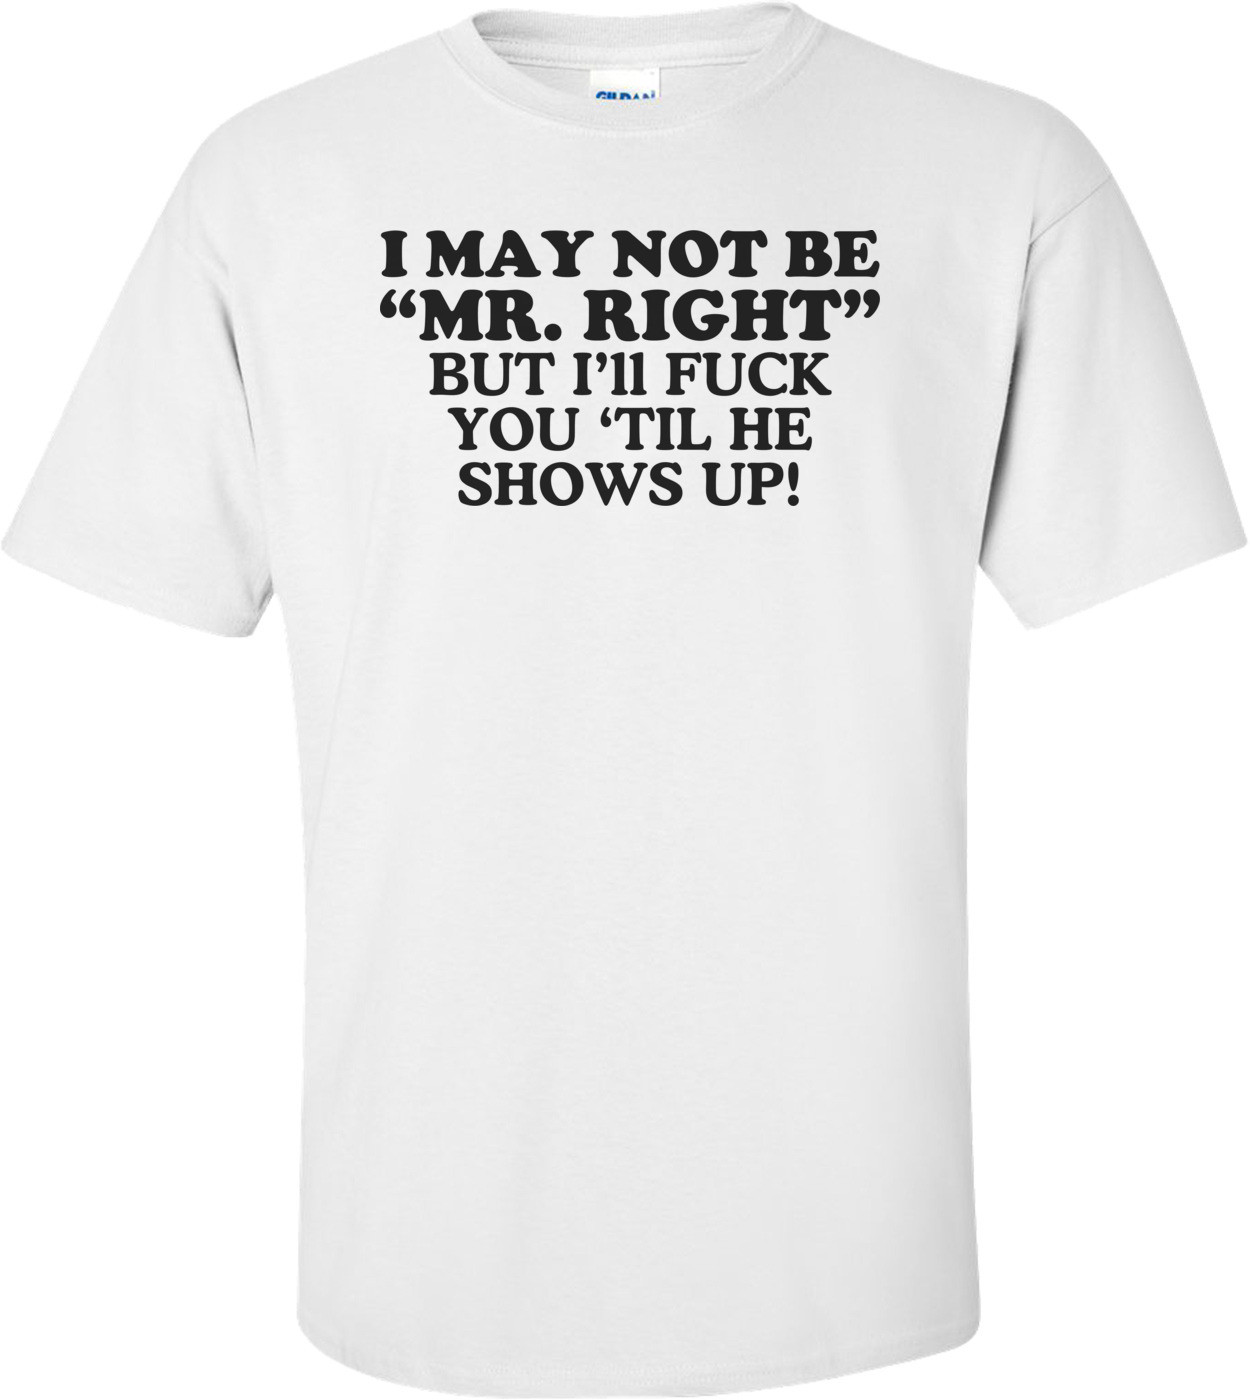 I May Not Be Mr. Right, But I'll Fuck You 'Til He Shows Up! Offensive